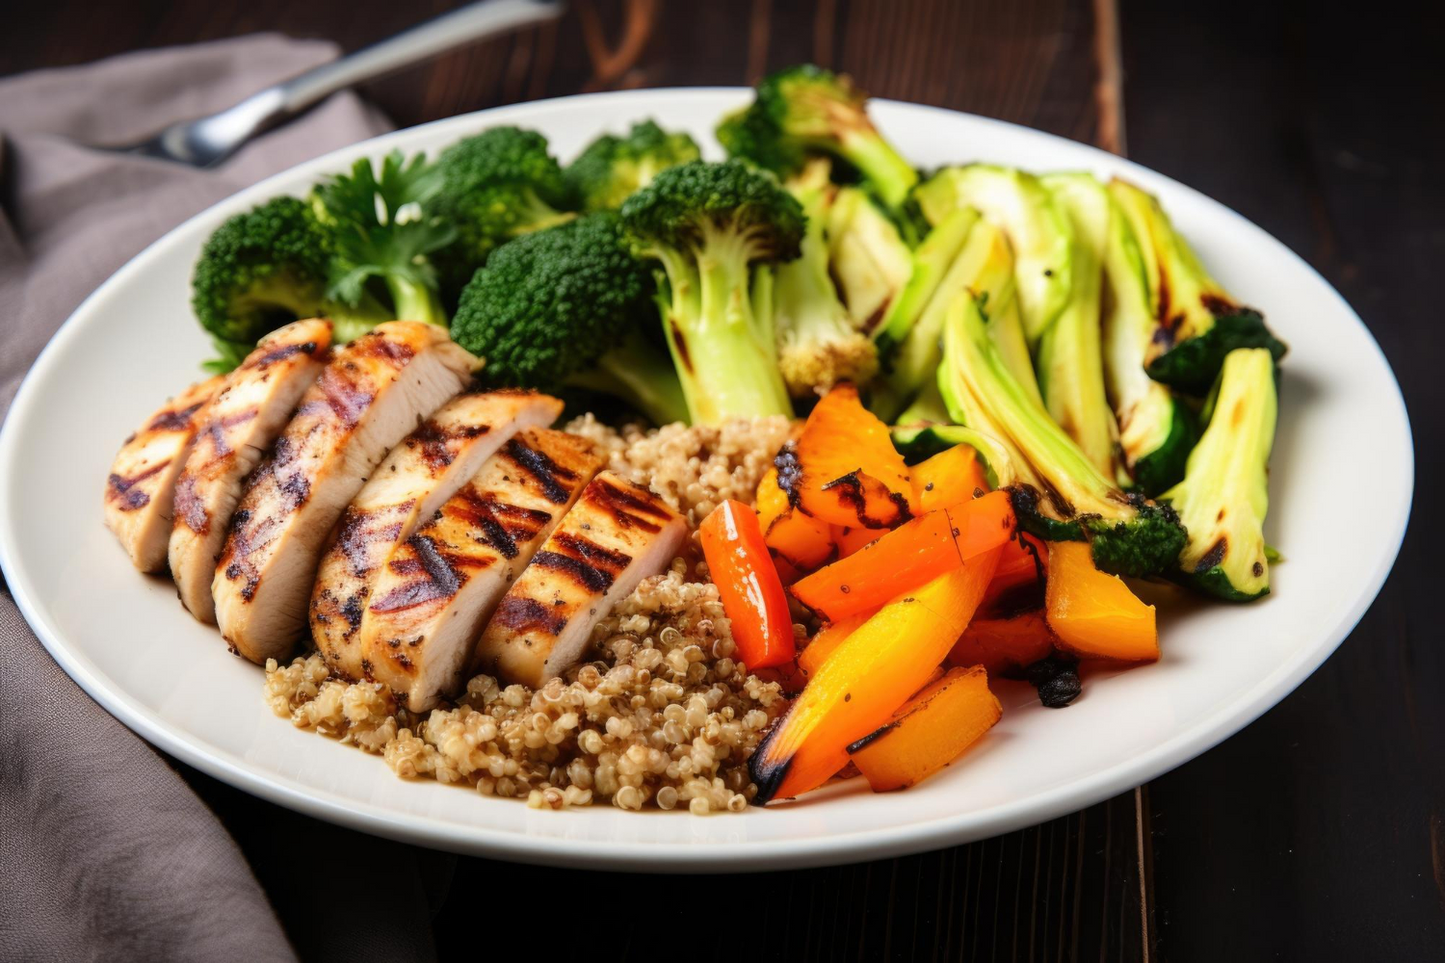 Grilled chicken with roasted vegetables on top a bed of quinoa